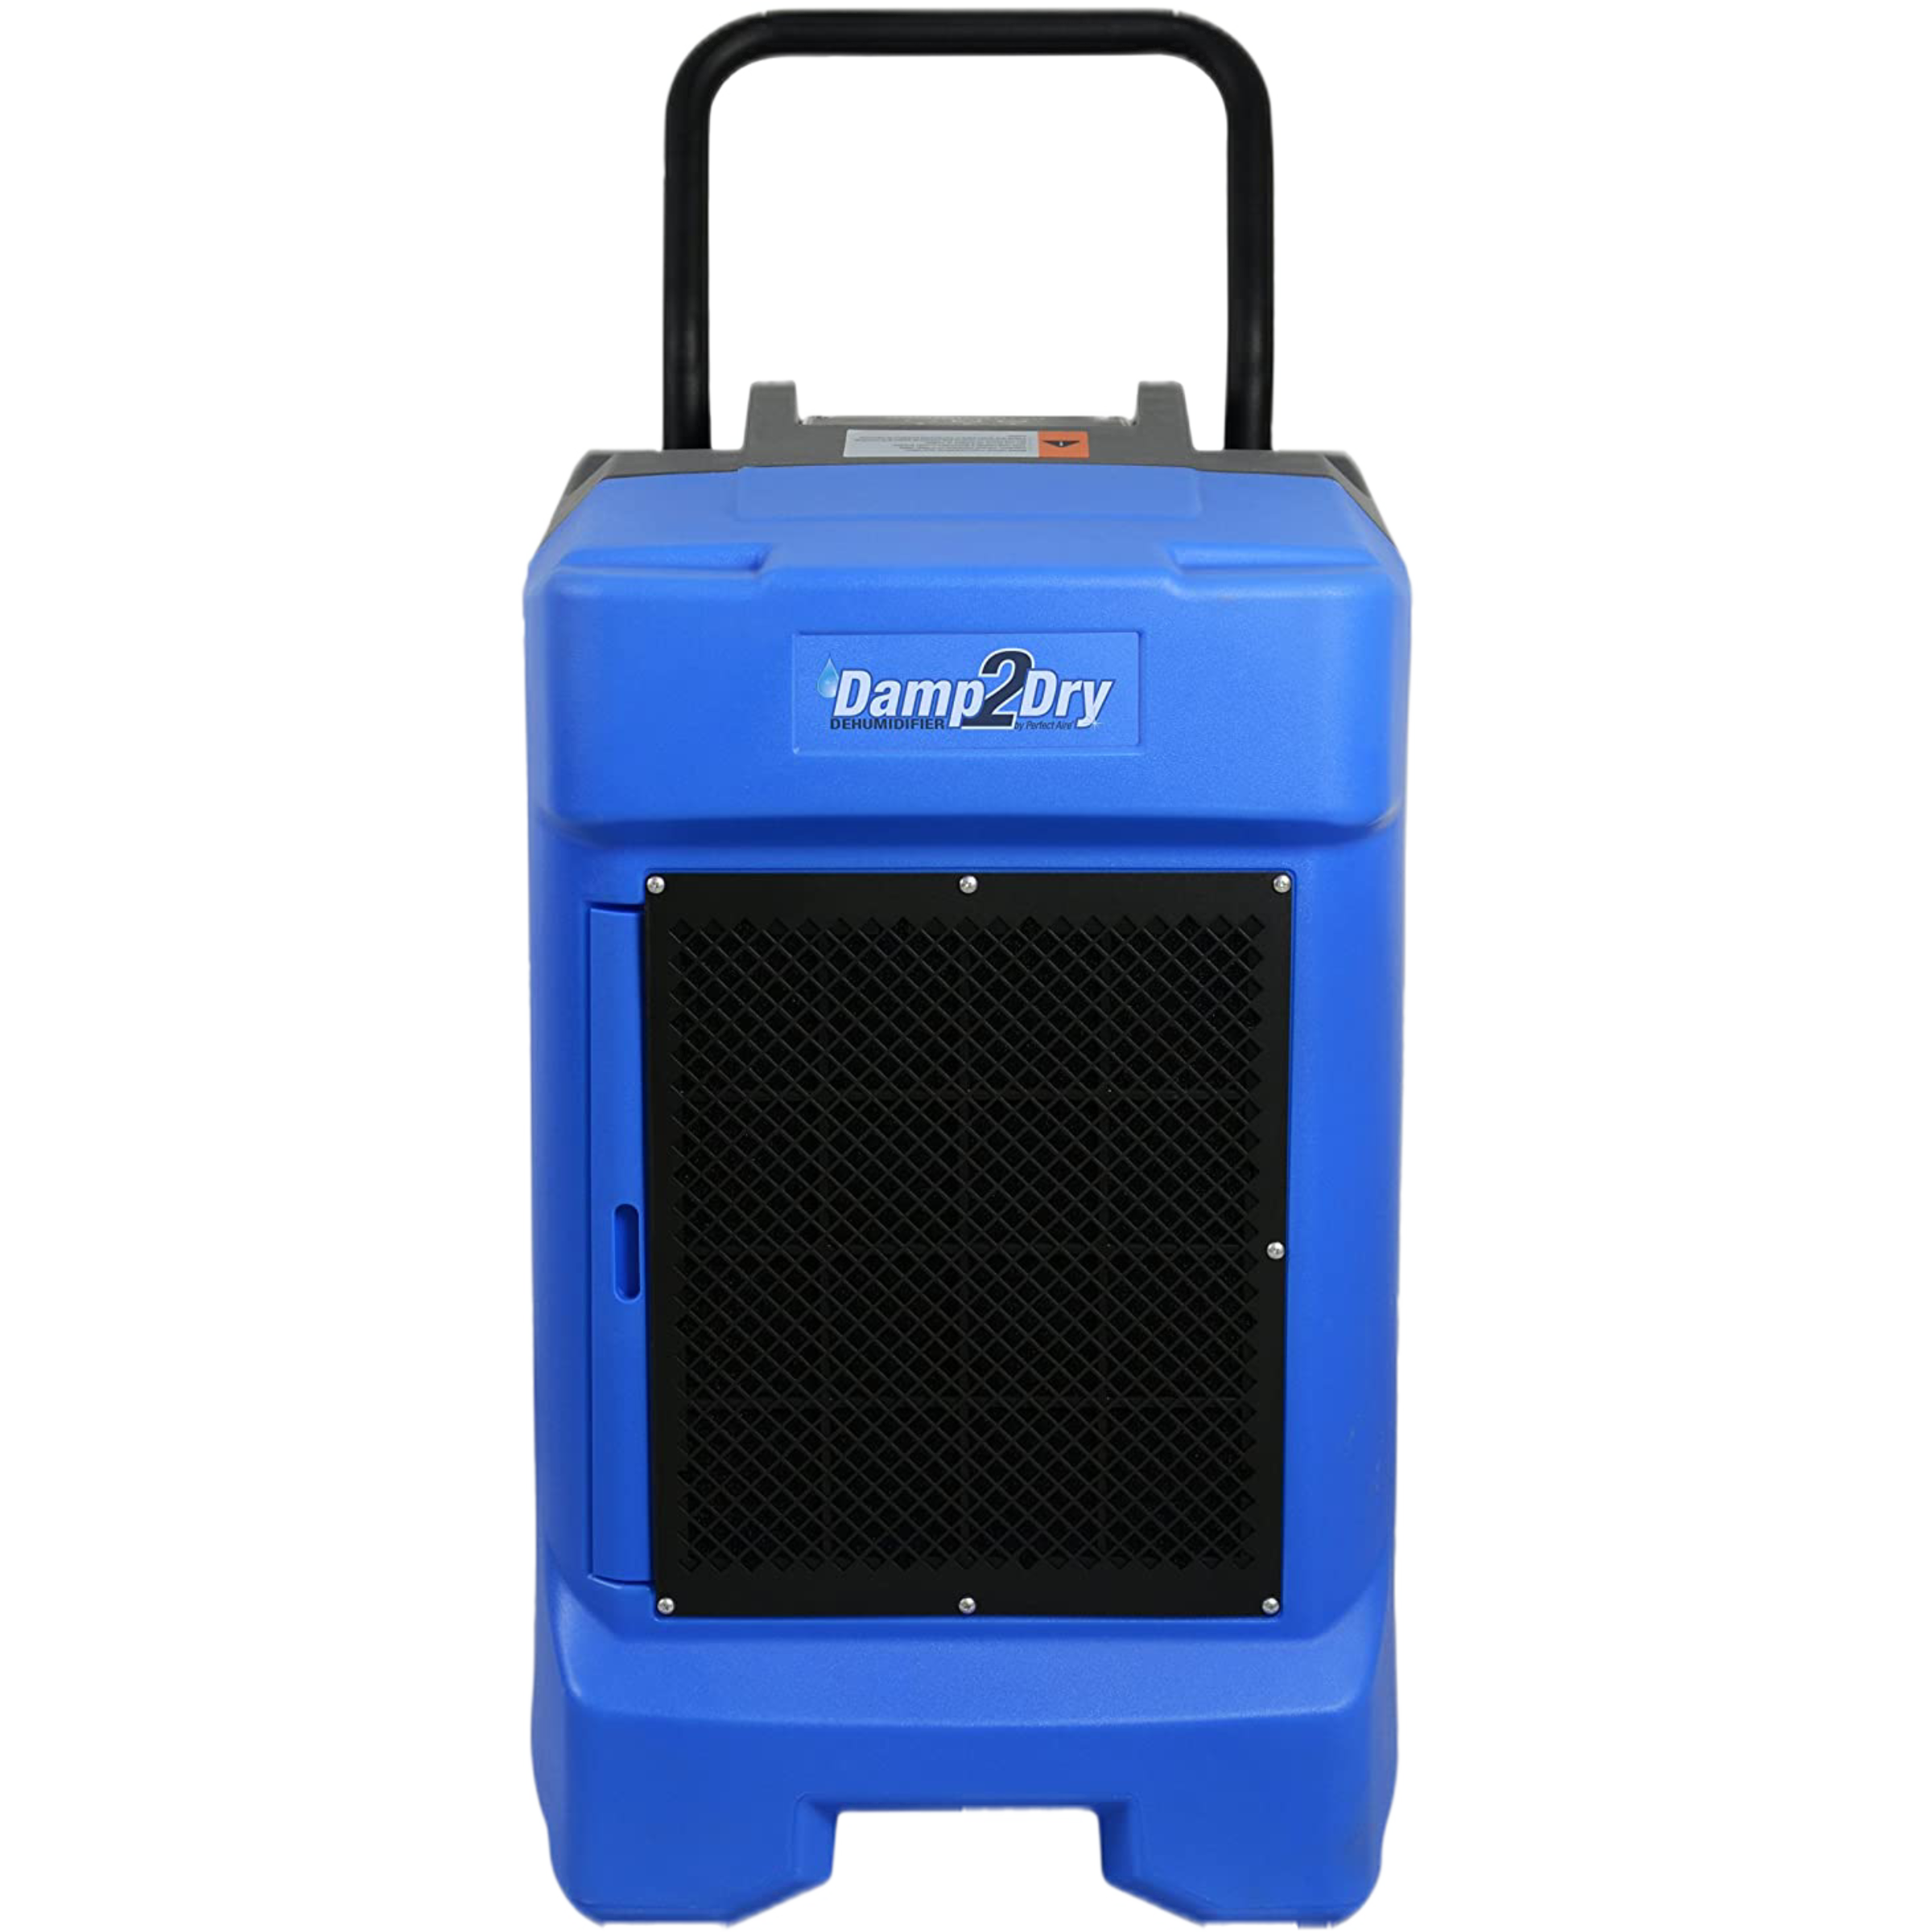 PerfectAire-Dehumidifier-2PACD200, Damp2Dry 95 Liter/200 Pint Commercial Dehumidifier, Built-In Pump